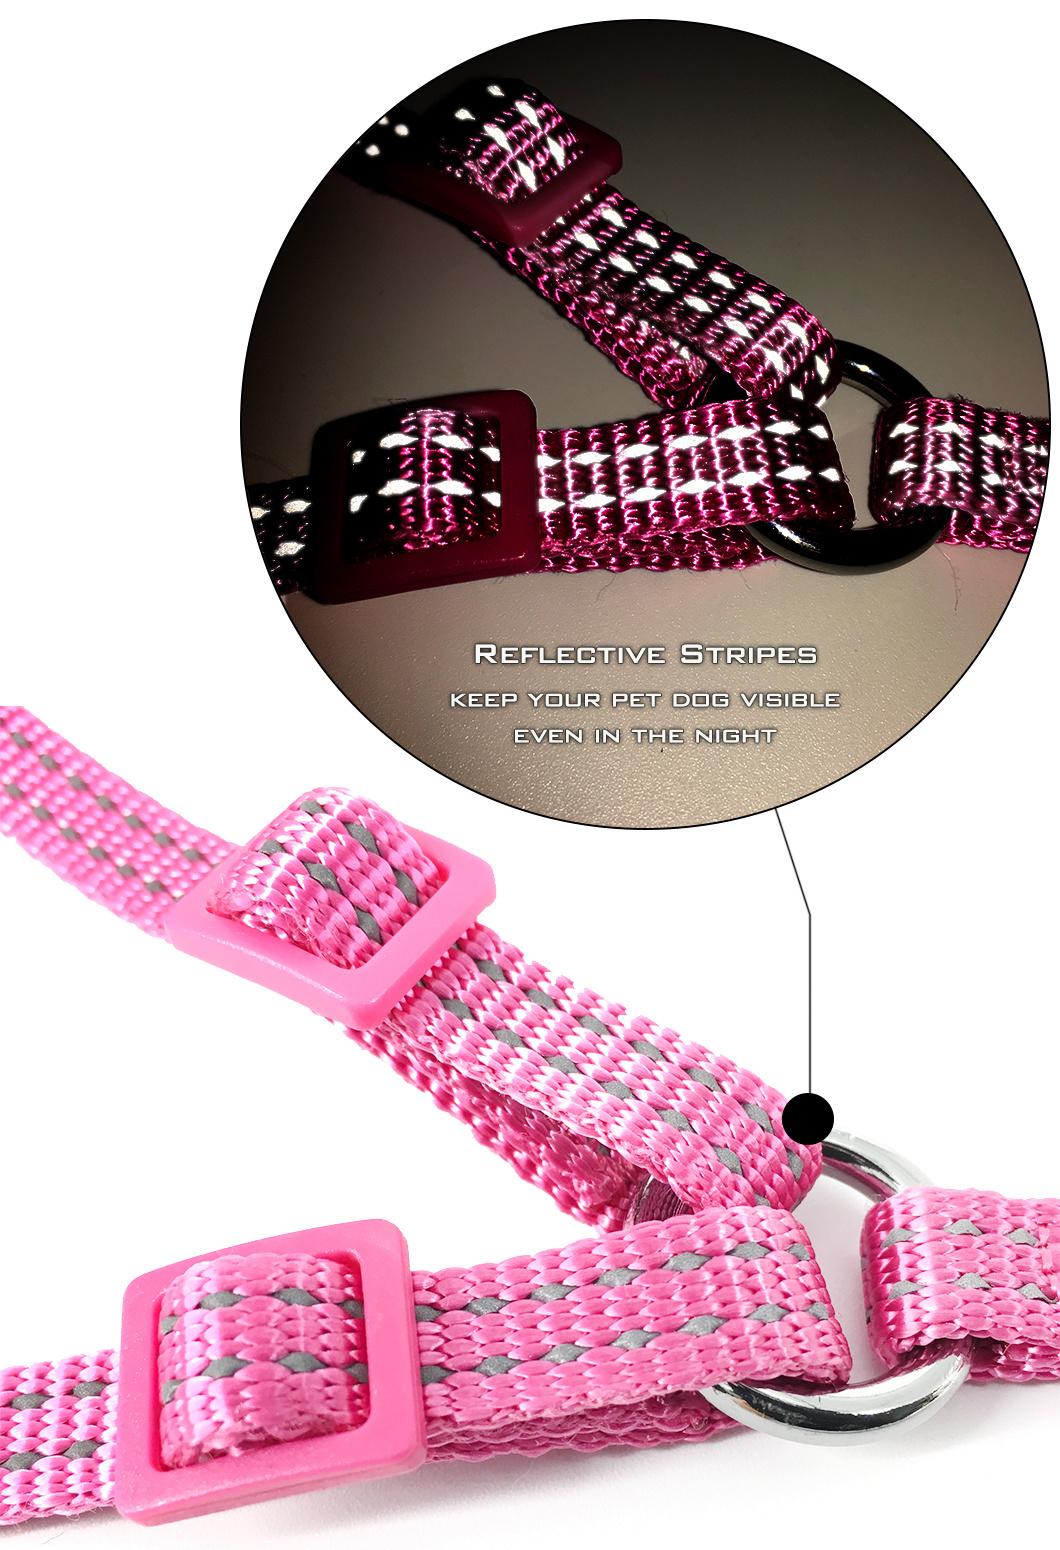 No Pull Adjustable Reflective Breathable Outdoor Wholesale Dog Harness